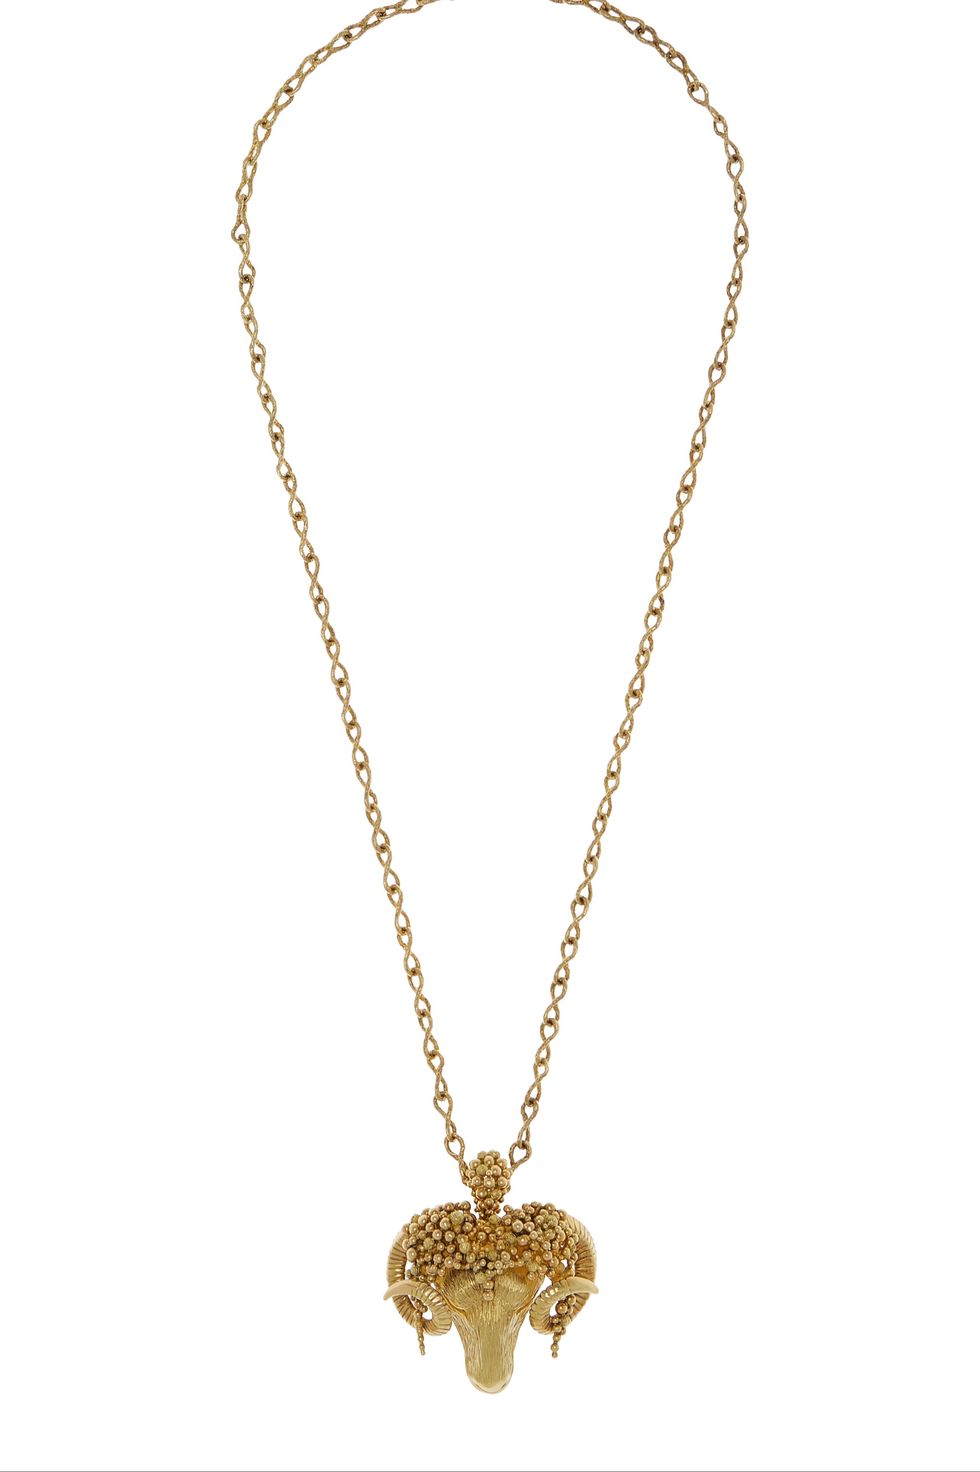 An Expert’s Guide to the Best Long Pendant Necklaces and Gifts